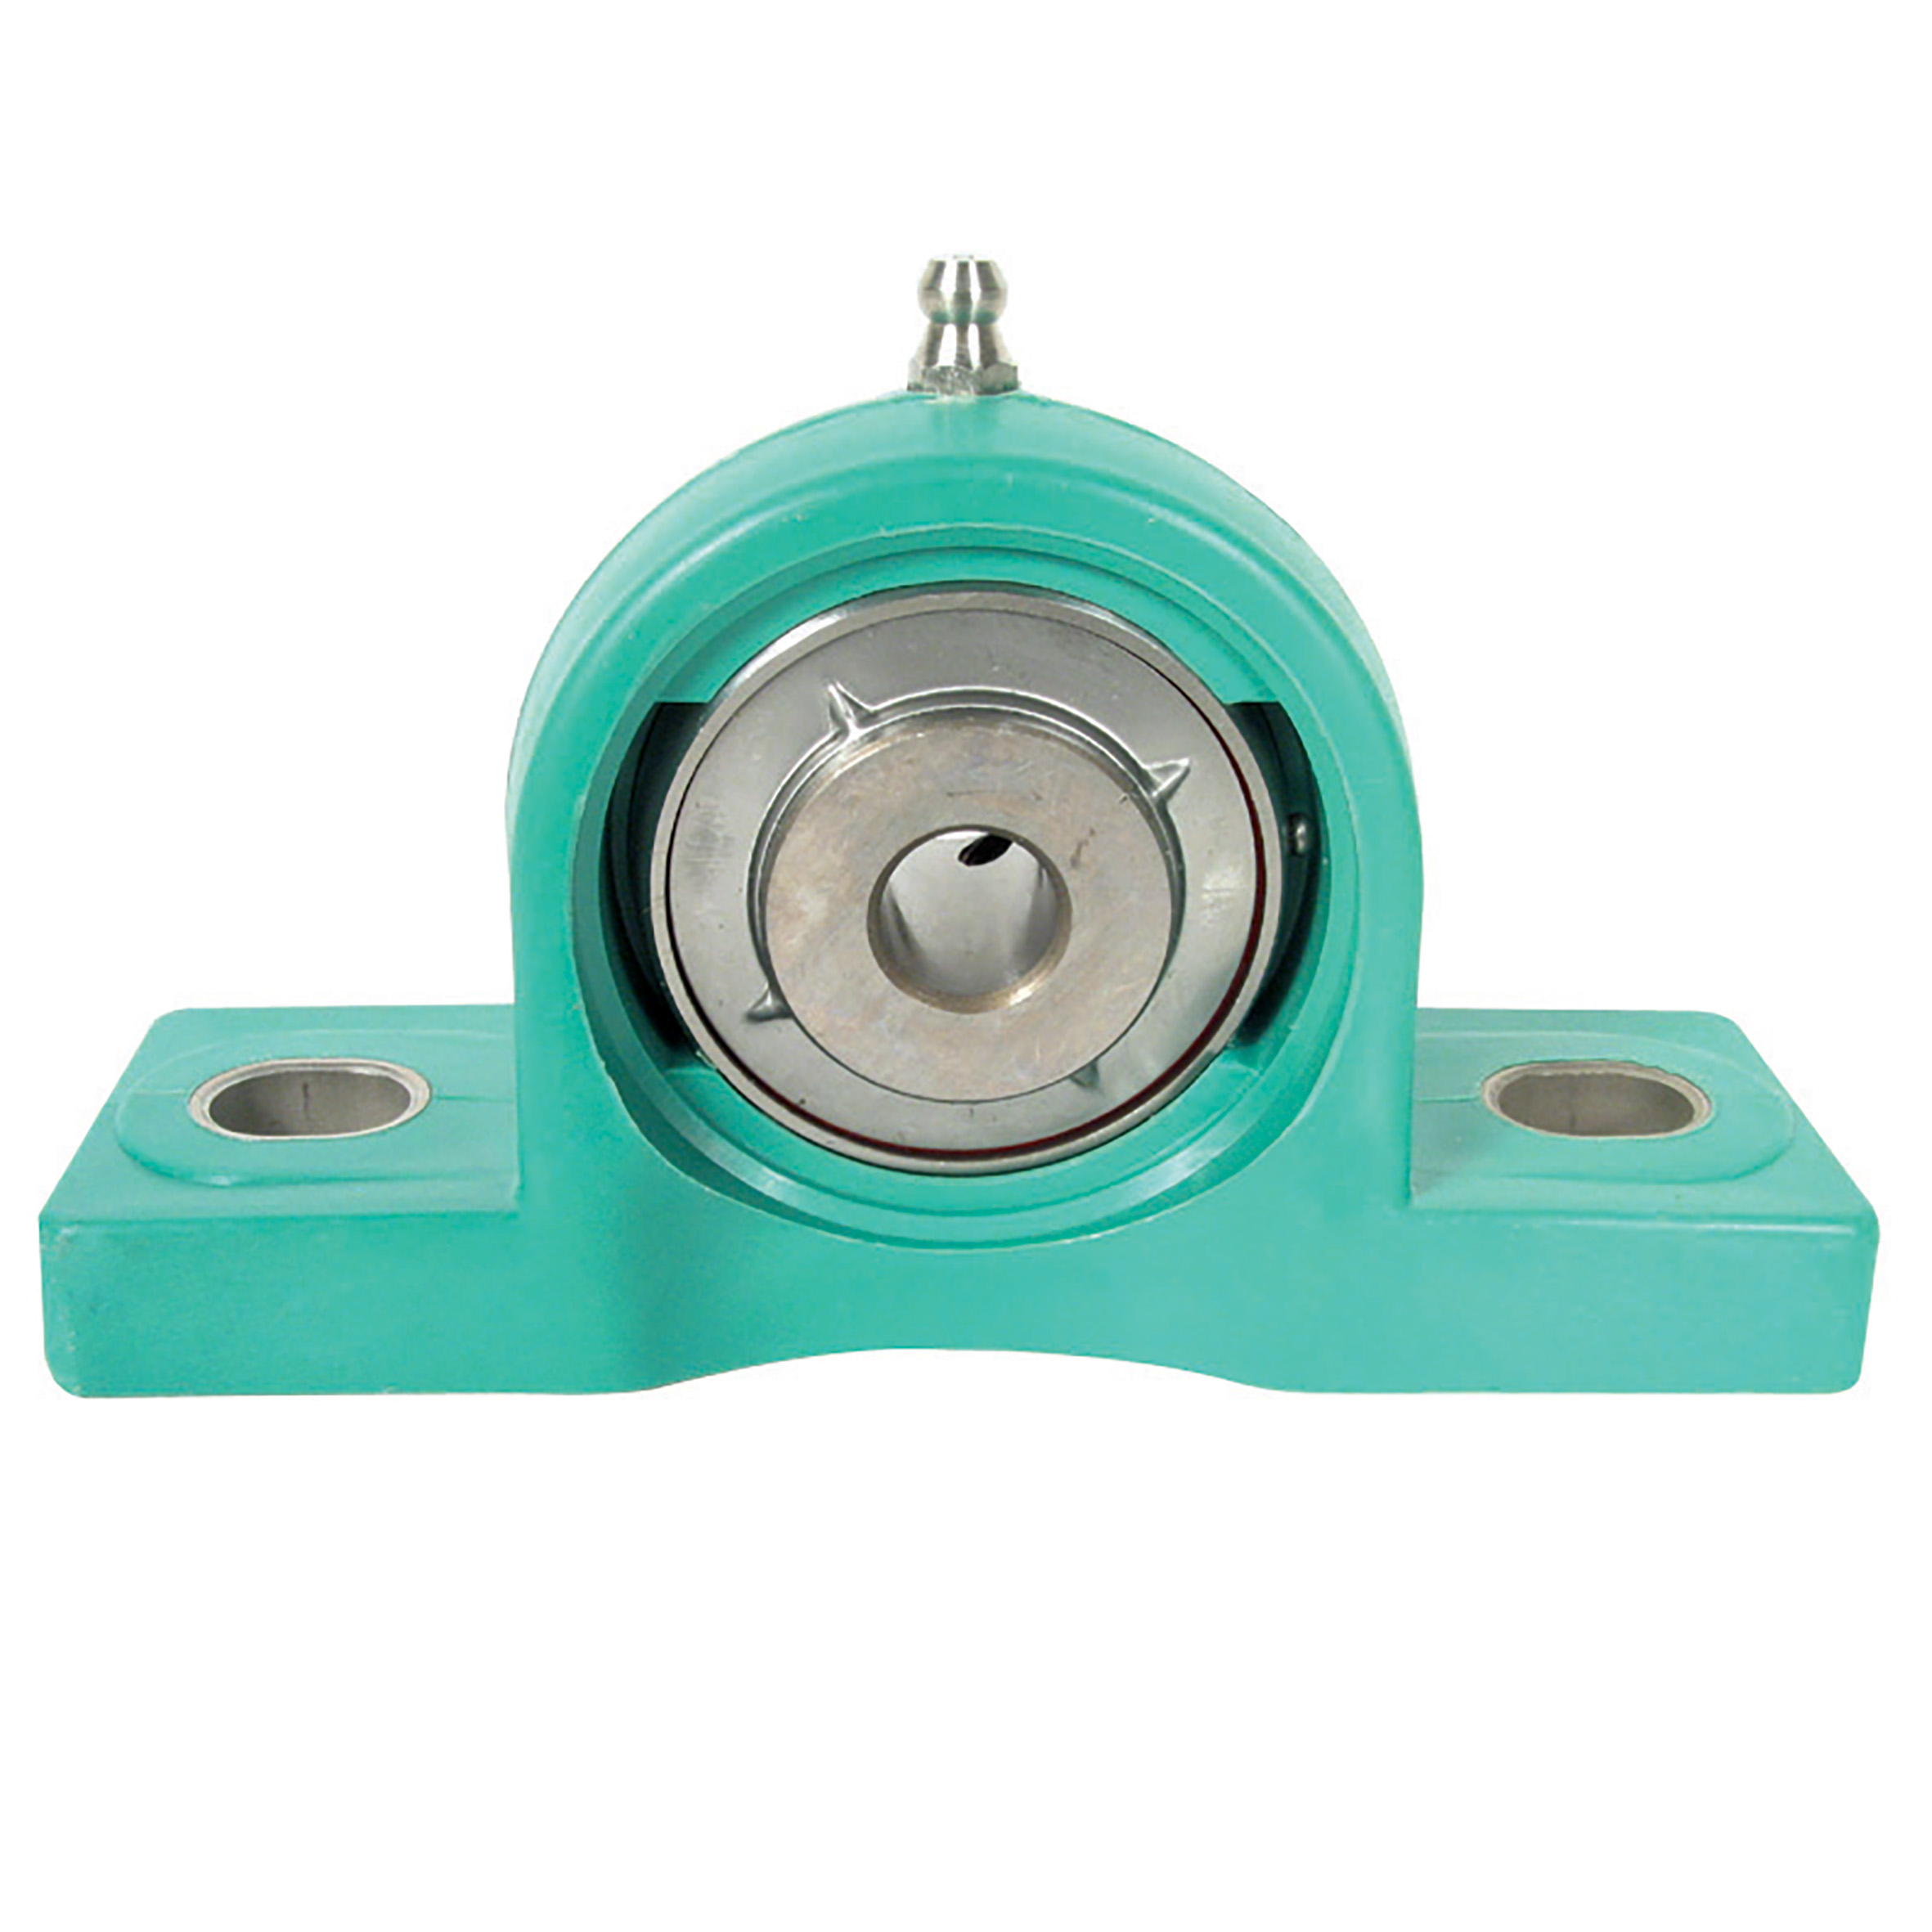 Stainless/Polymer pillow block bearing - Polymer and stainless steel - 2 fixing holes - Green